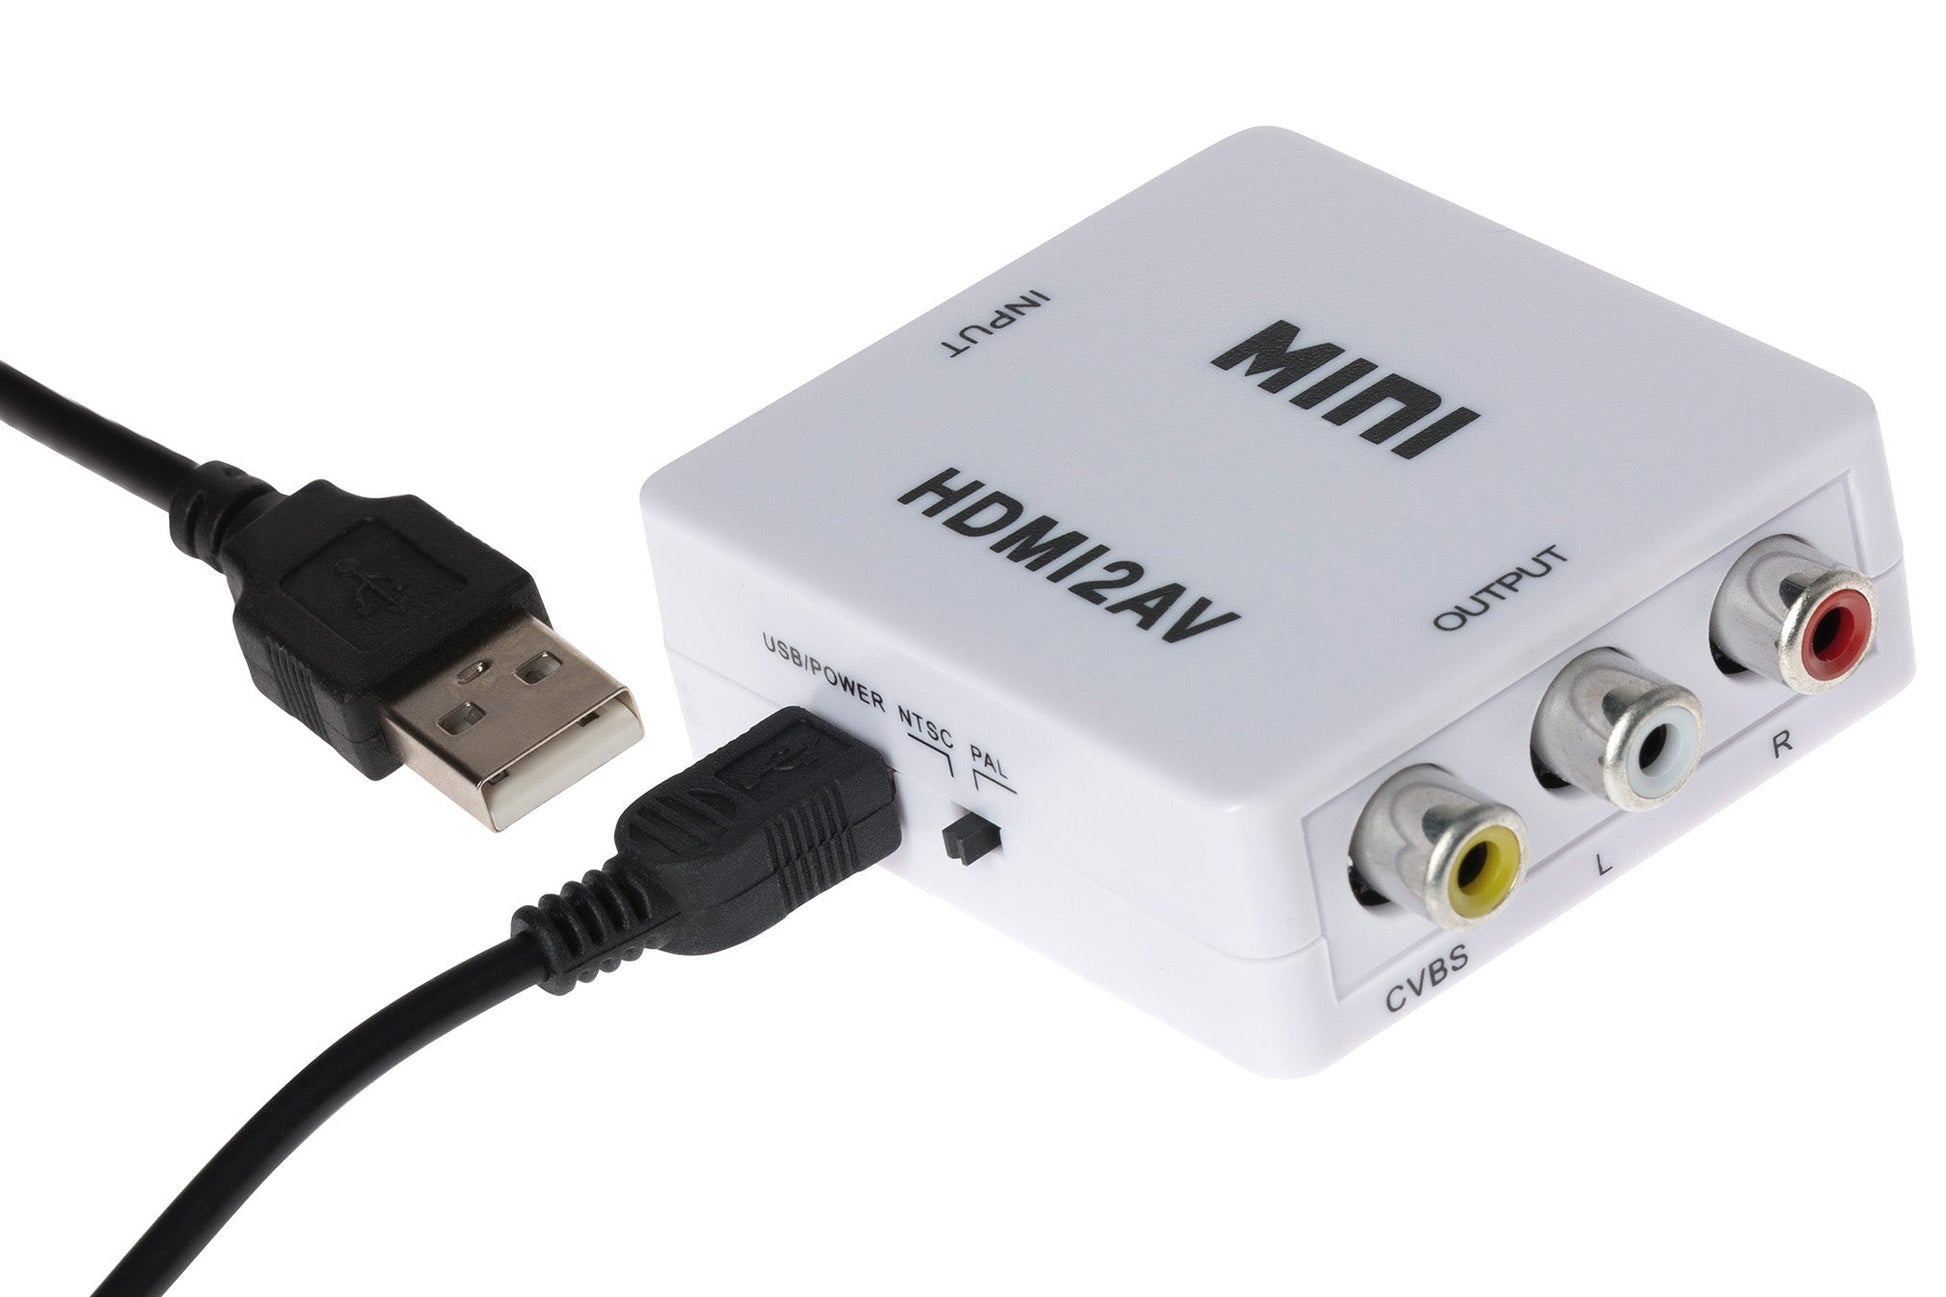 Maplin SCART to HDMI Adapter - Black, Chargers & Adapters, Maplin